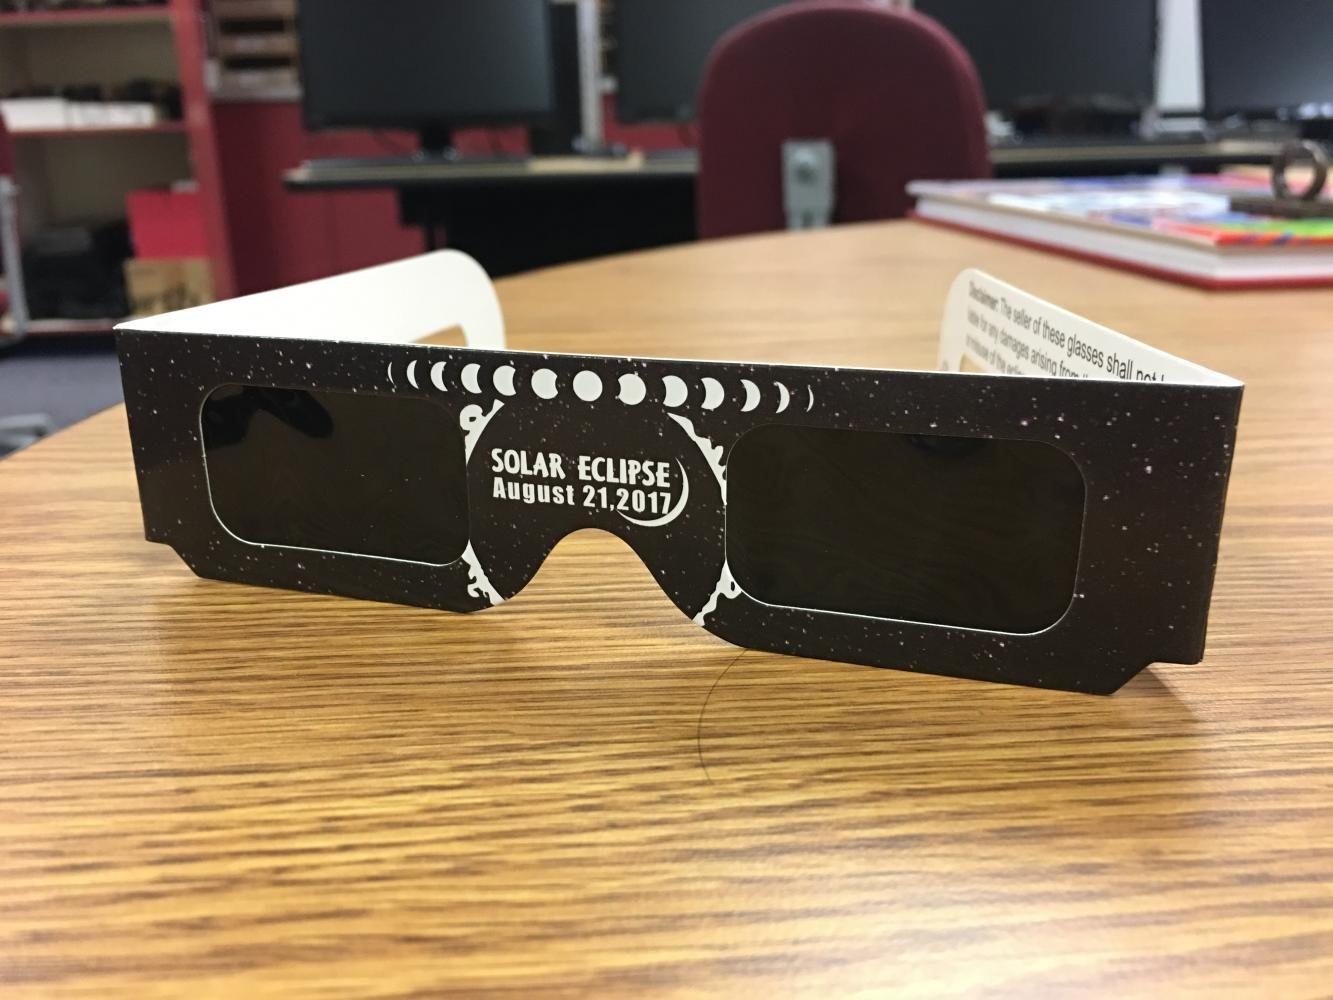 Special solar eclipse glasses will be provided by the school. Classes will be taken outside to view the eclipse during C lunch.